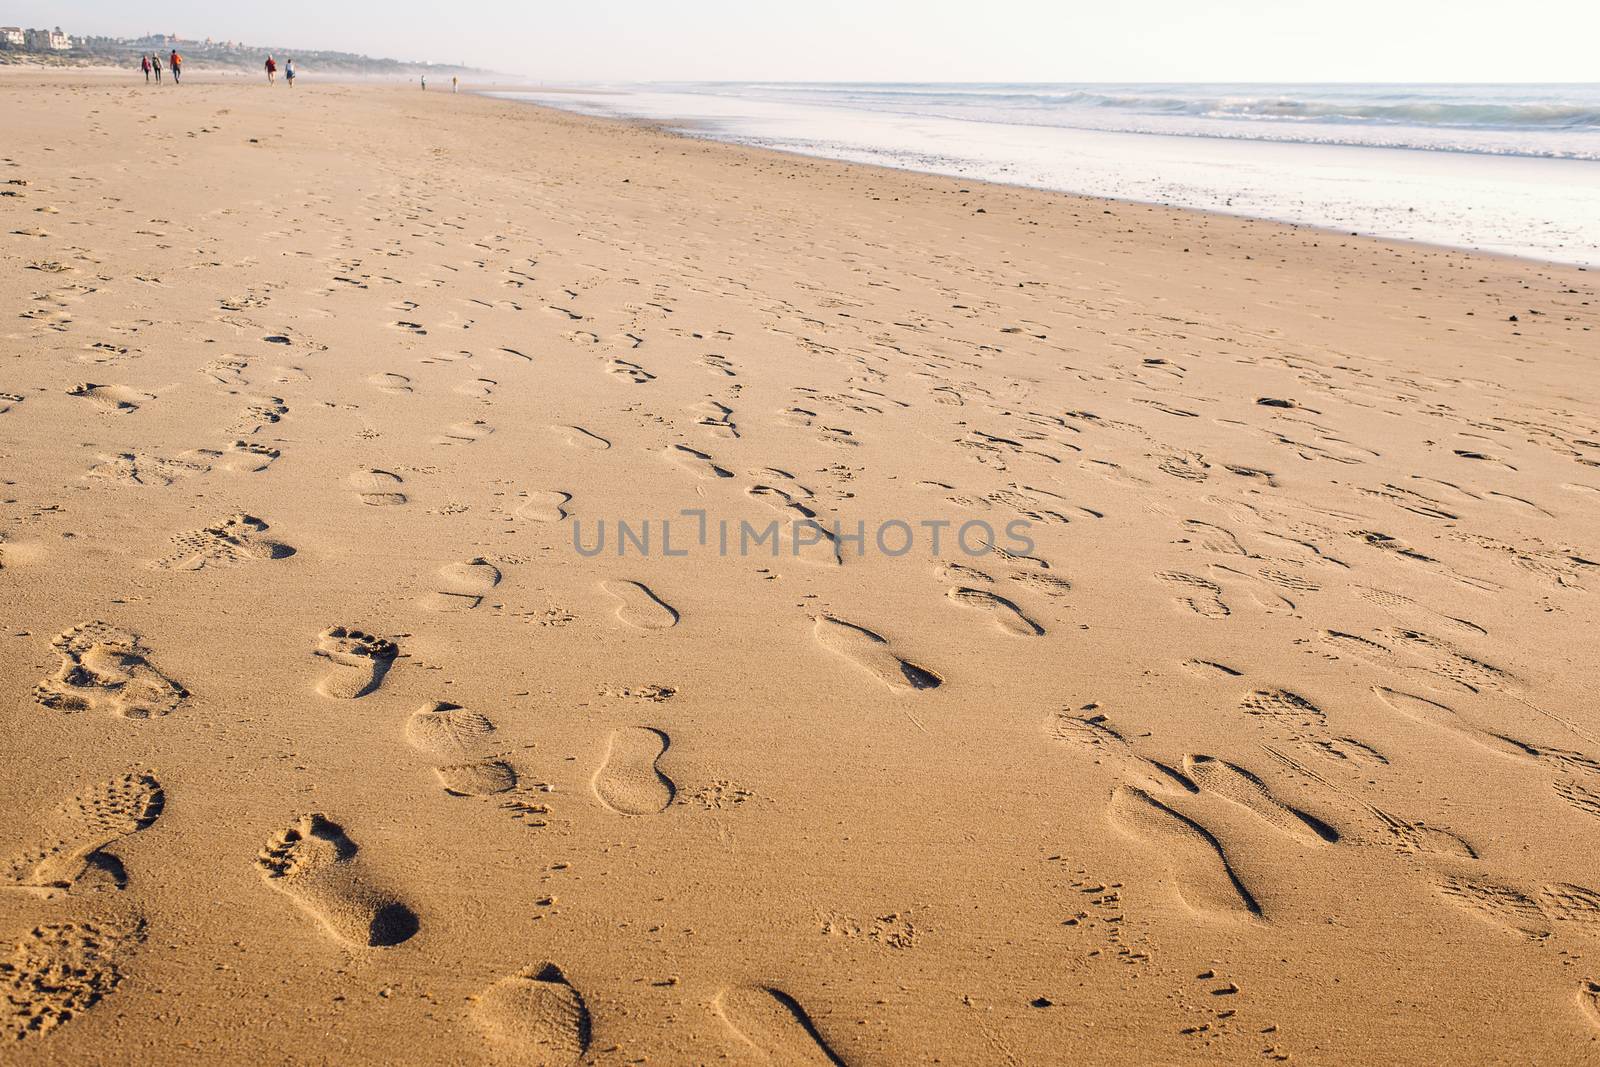 footprints in the wet sand of the beach, in the background there are people walking along the shore